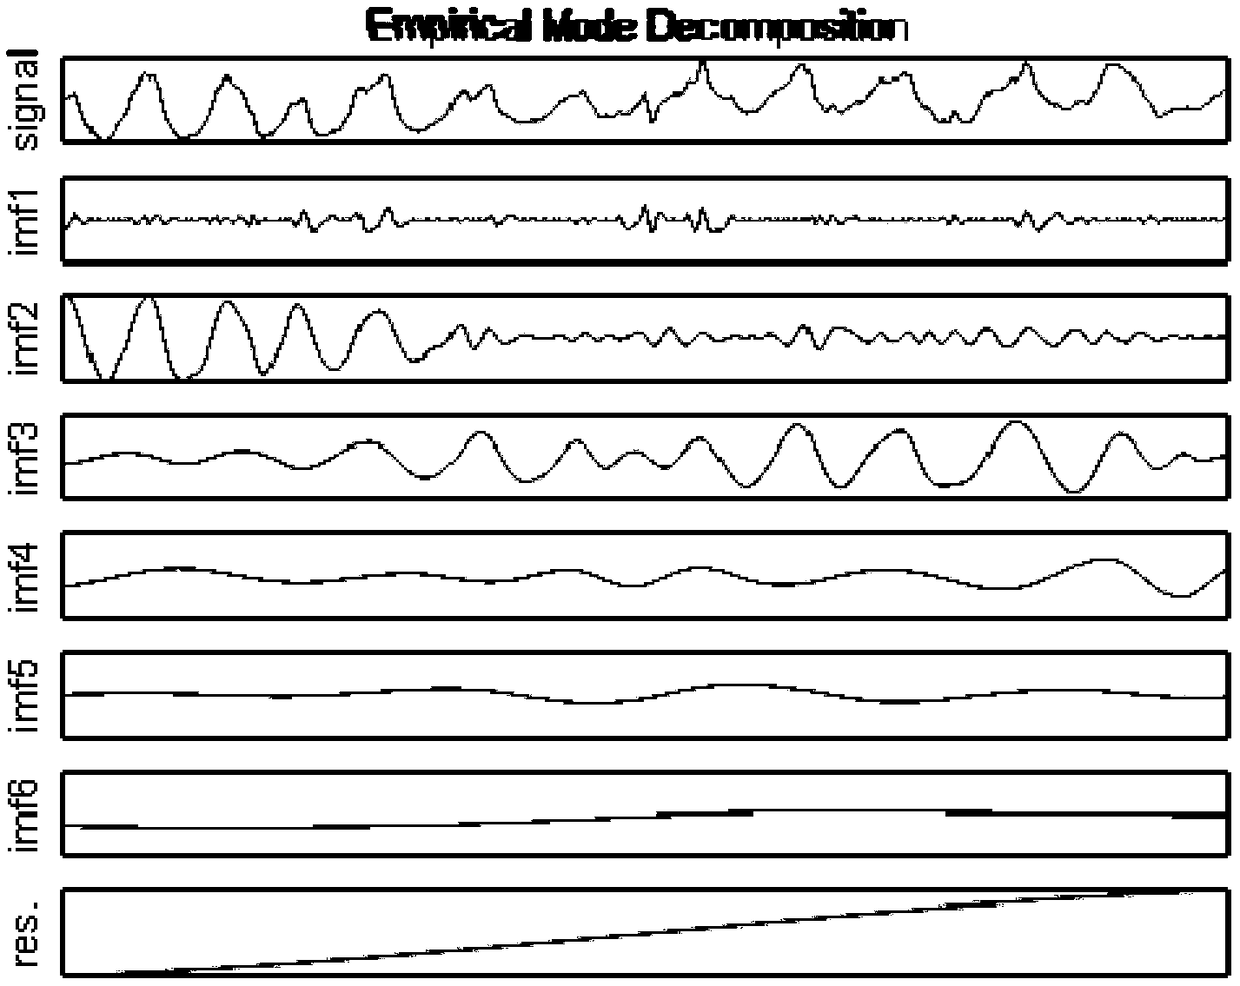 Heartbeat and breathing feature monitoring method based on ultra wide band radar sensor